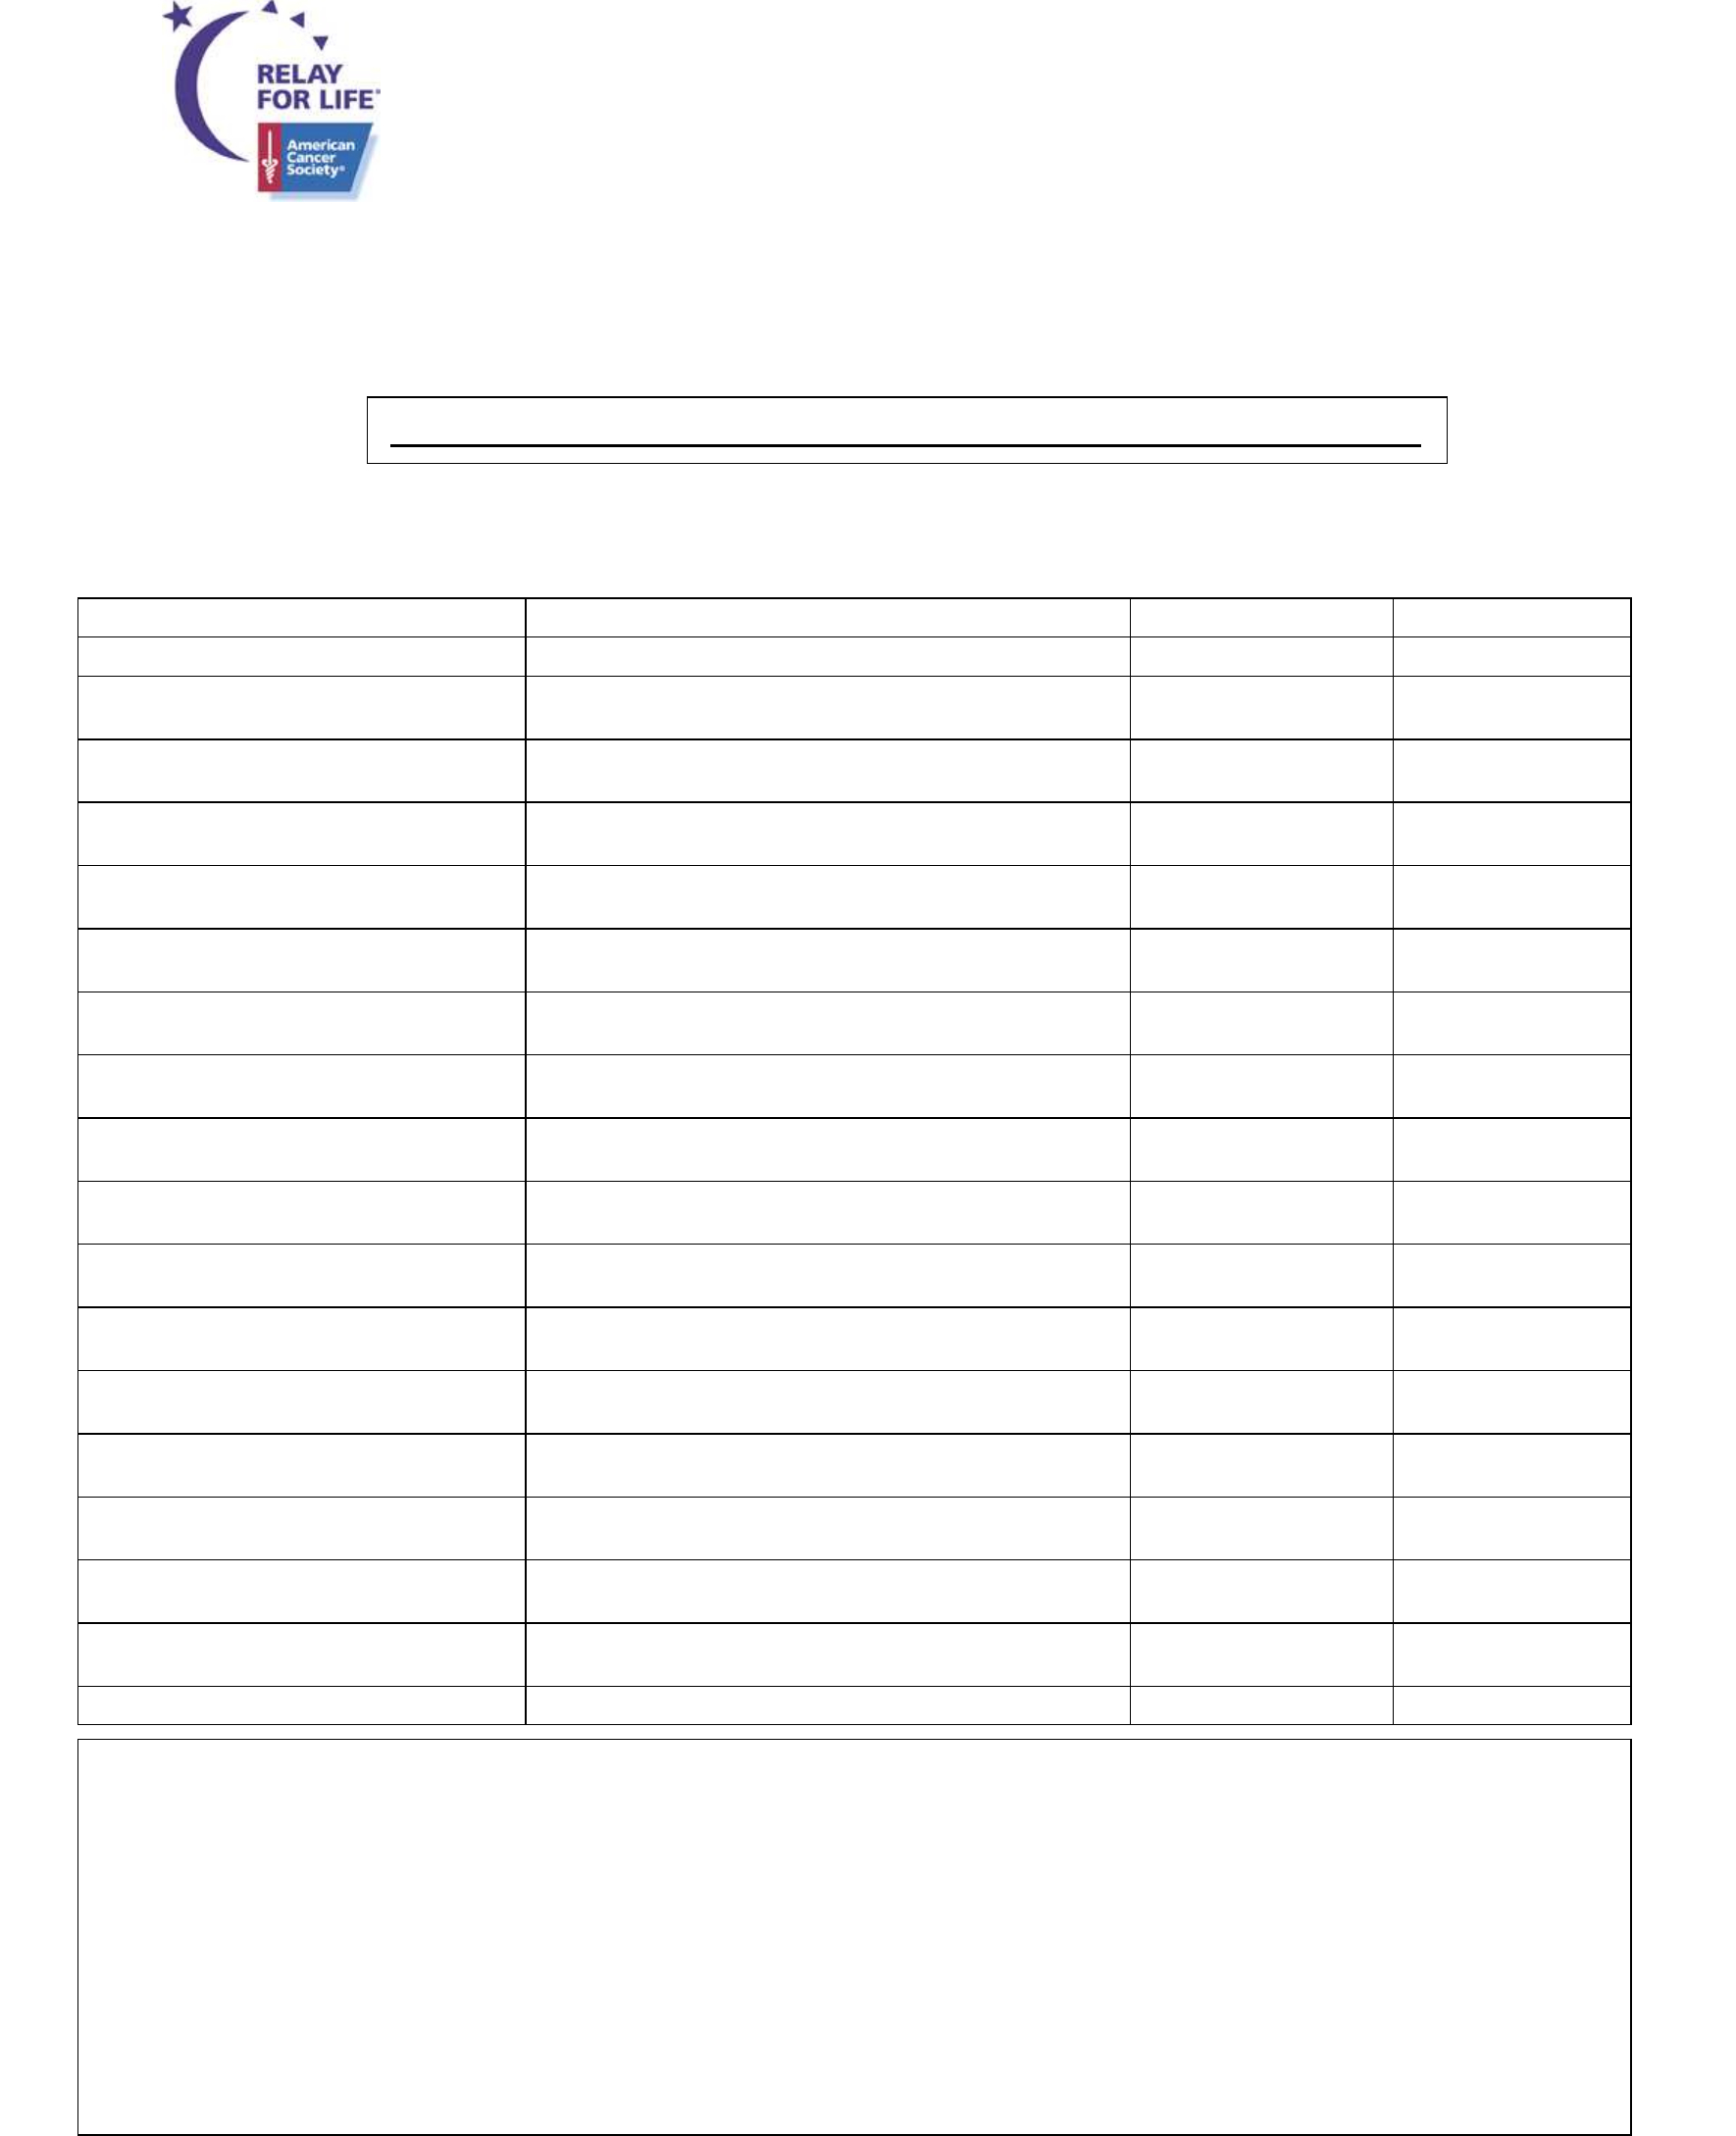 Relay For Life Donation Form – America Free Download Regarding Blank Sponsorship Form Template